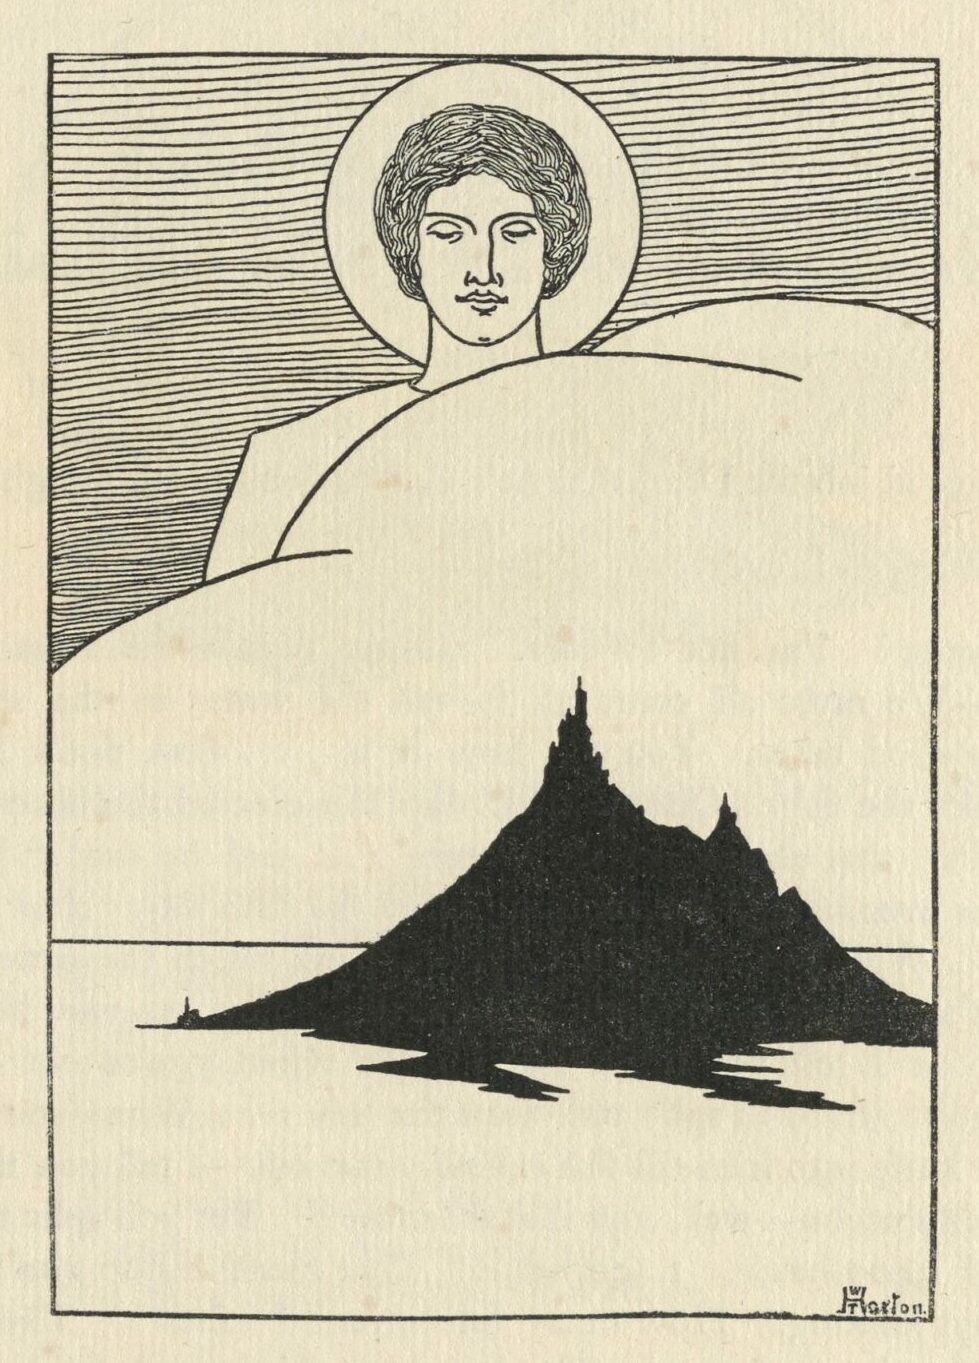 This pen and ink drawing, outlined by a thin black rectangular frame, is centered on the page above the text, in portrait orientation. At the top of the page, a large figure, facing the viewer, gazes down on the scene from behind clouds. The figure has short hair, and their head is outlined with a circular halo. Below them, a silhouetted island floats upon the sea. The artist’s monogram is in the bottom right corner of the frame.